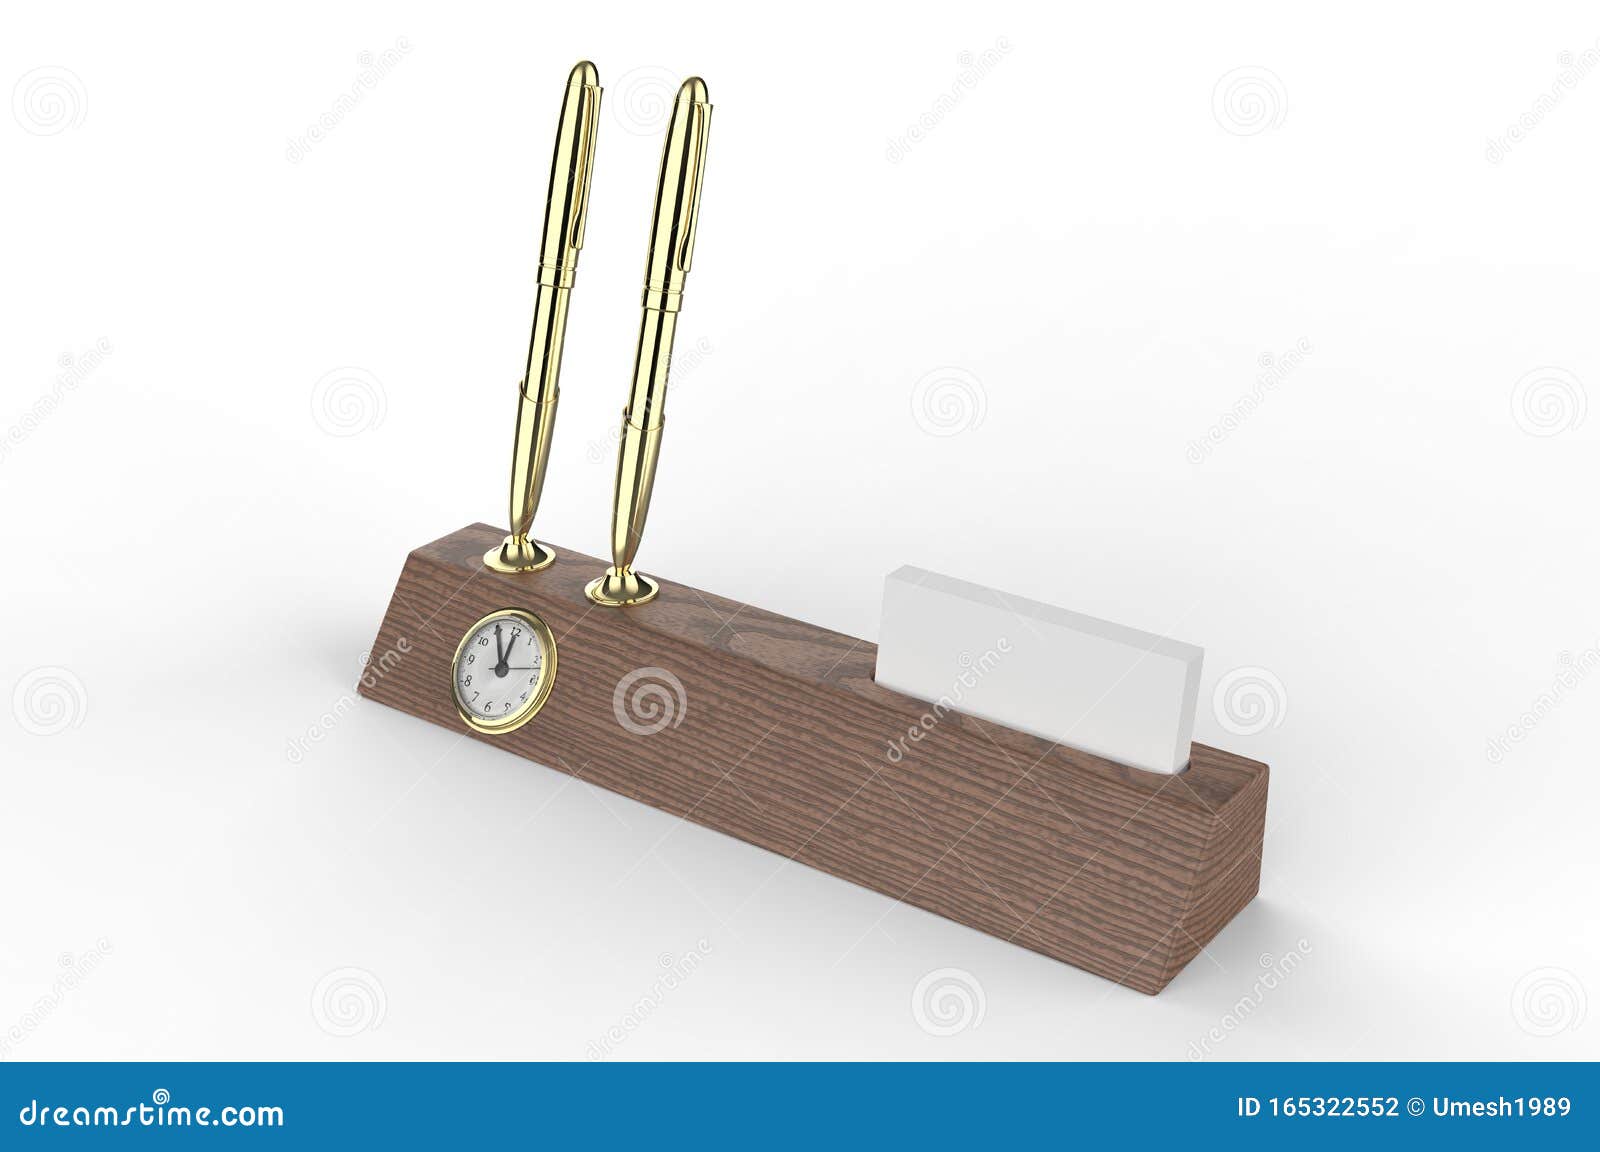 Blank Wooden Business Card Holder With Clock And Name Plate For